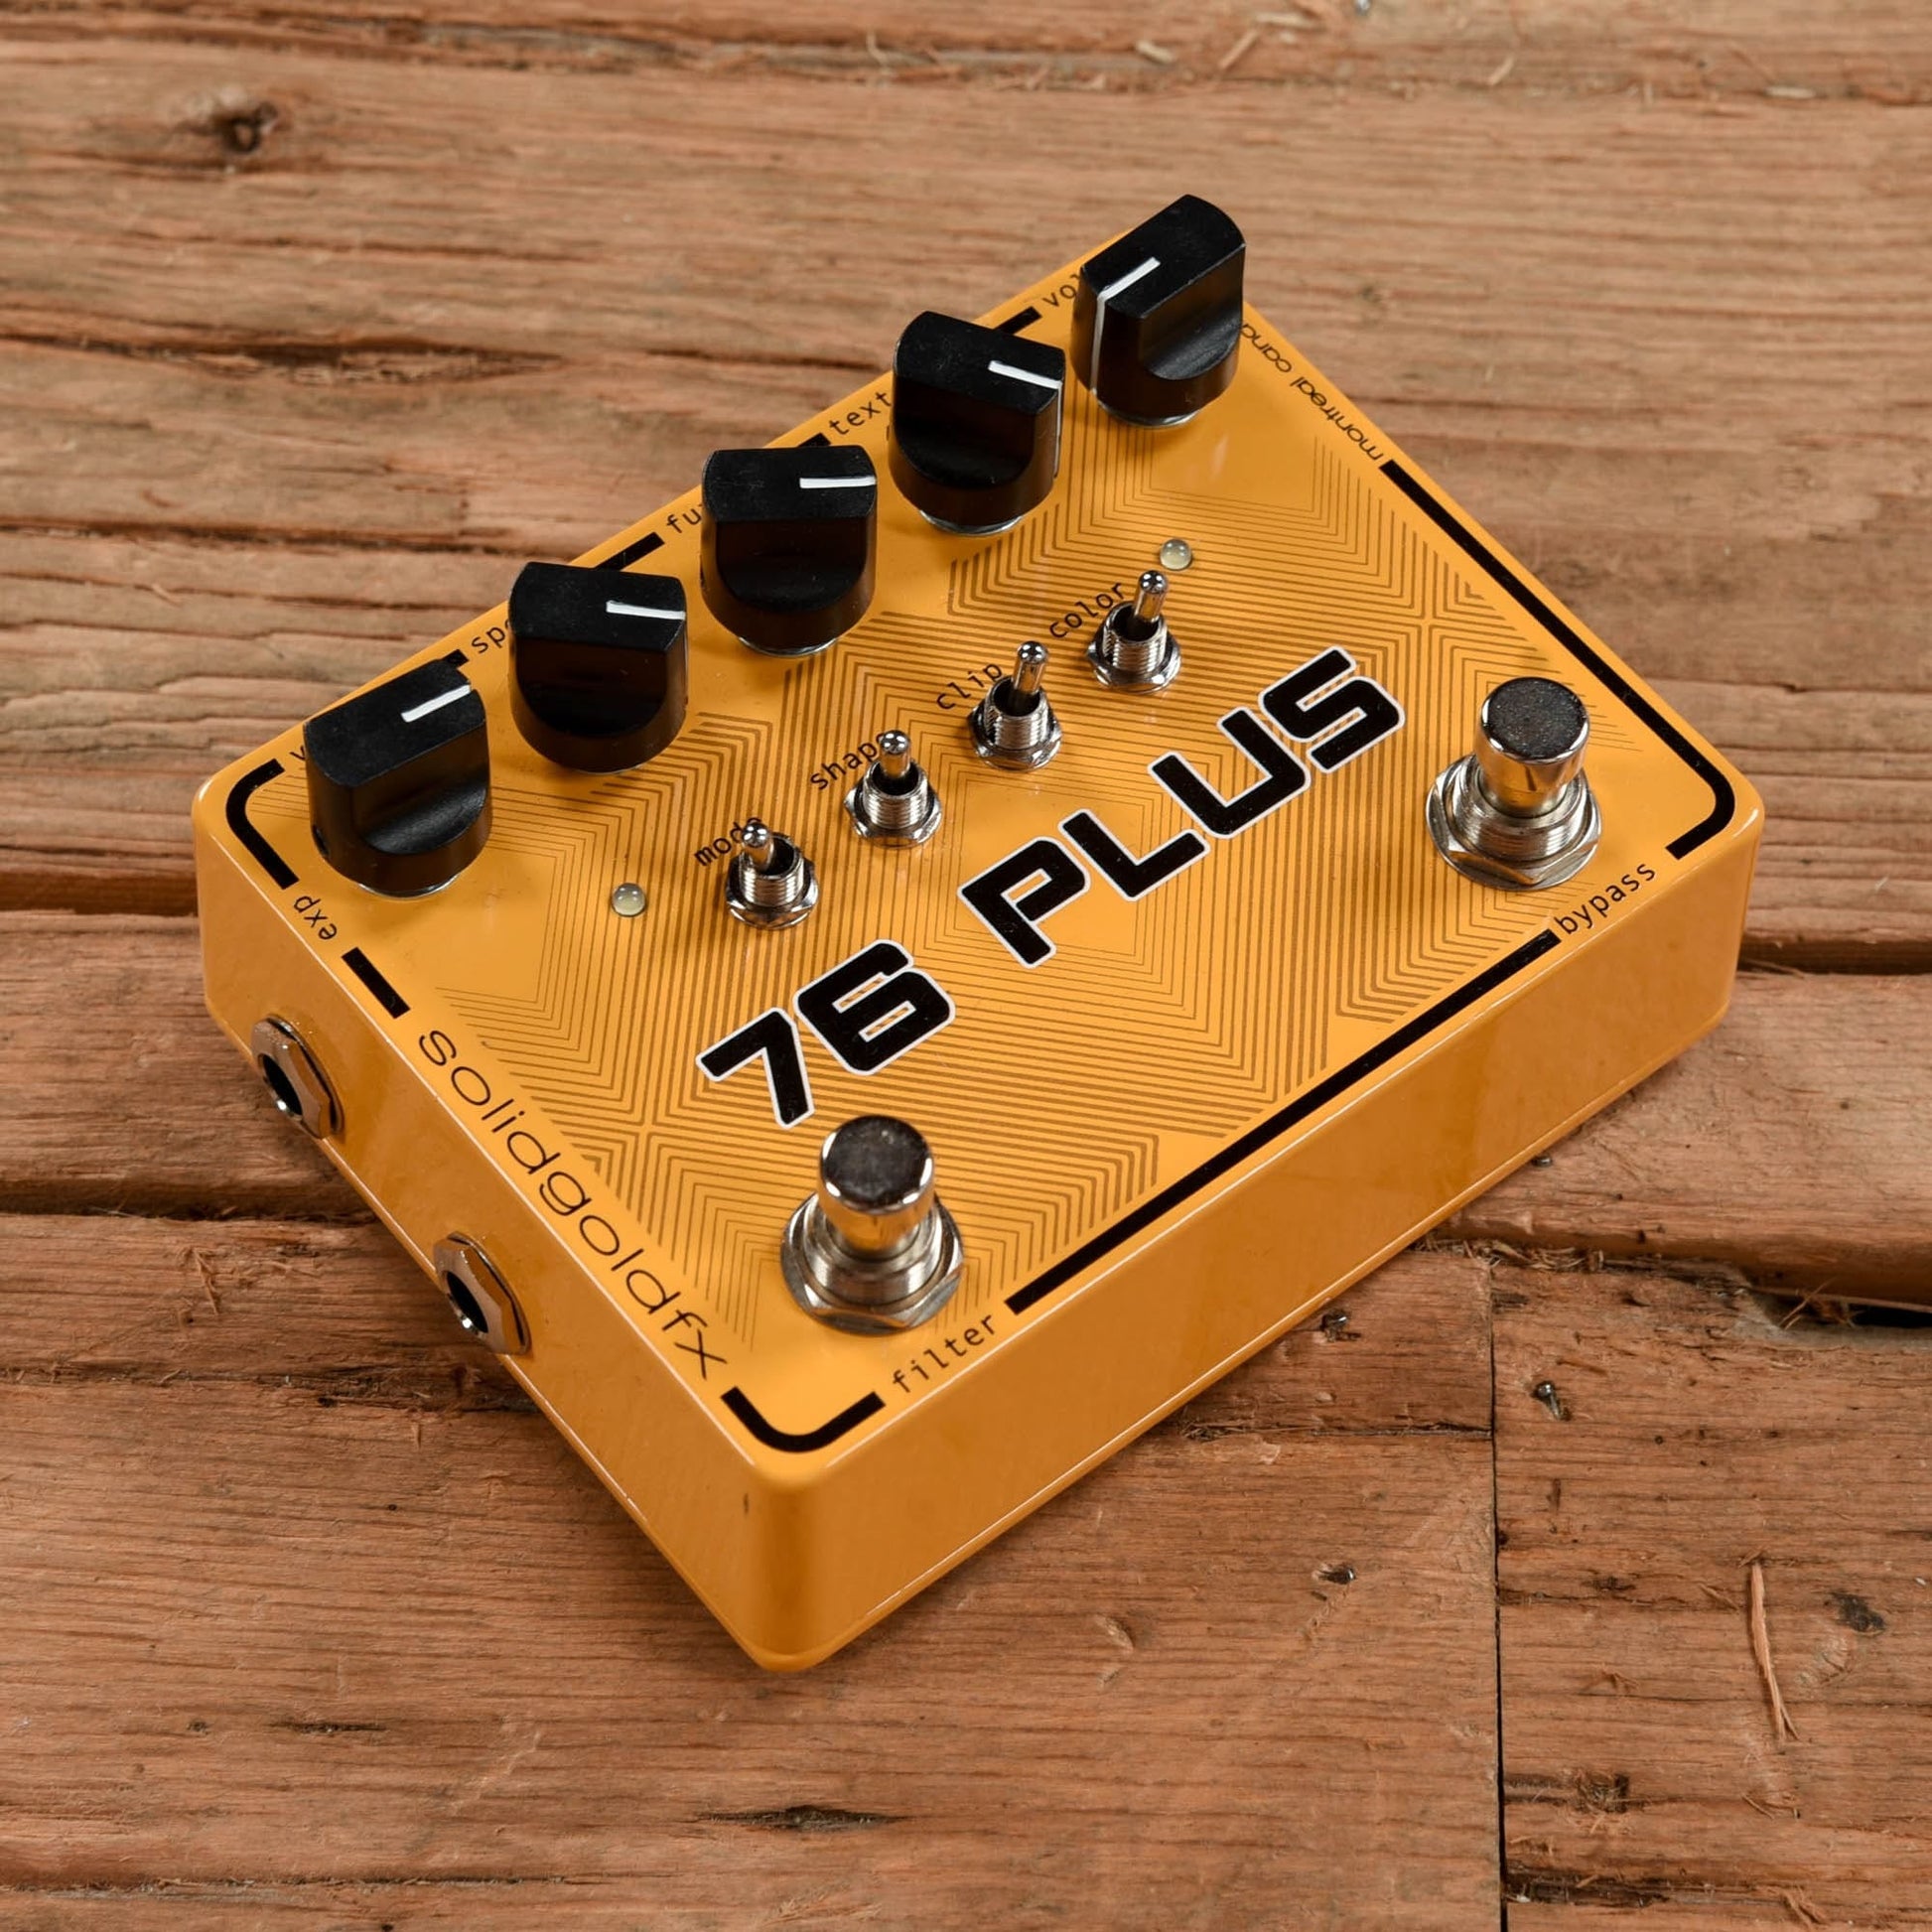 SolidGoldFX 76 Plus Effects and Pedals / Overdrive and Boost